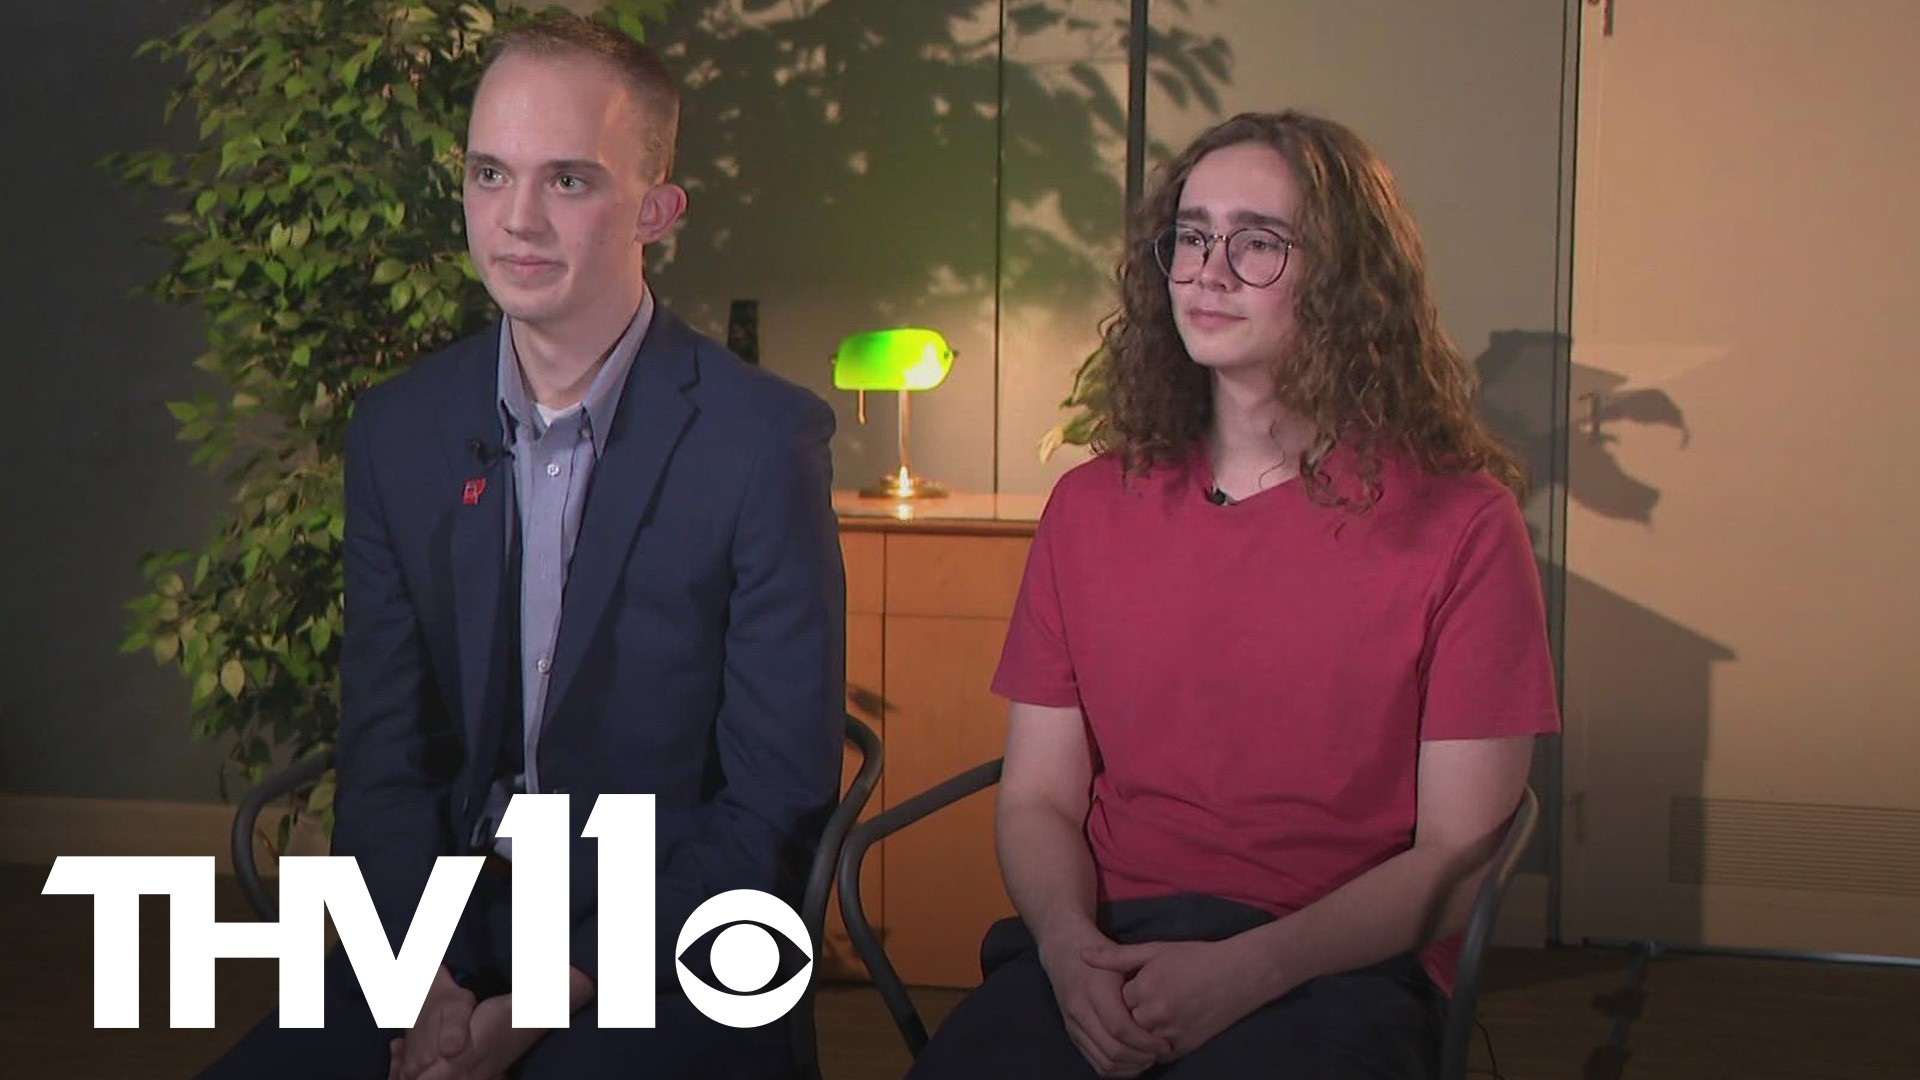 Two young voters, one Republican and one Democrat worked together to see where the two could find common political ground in the future ahead of the election.